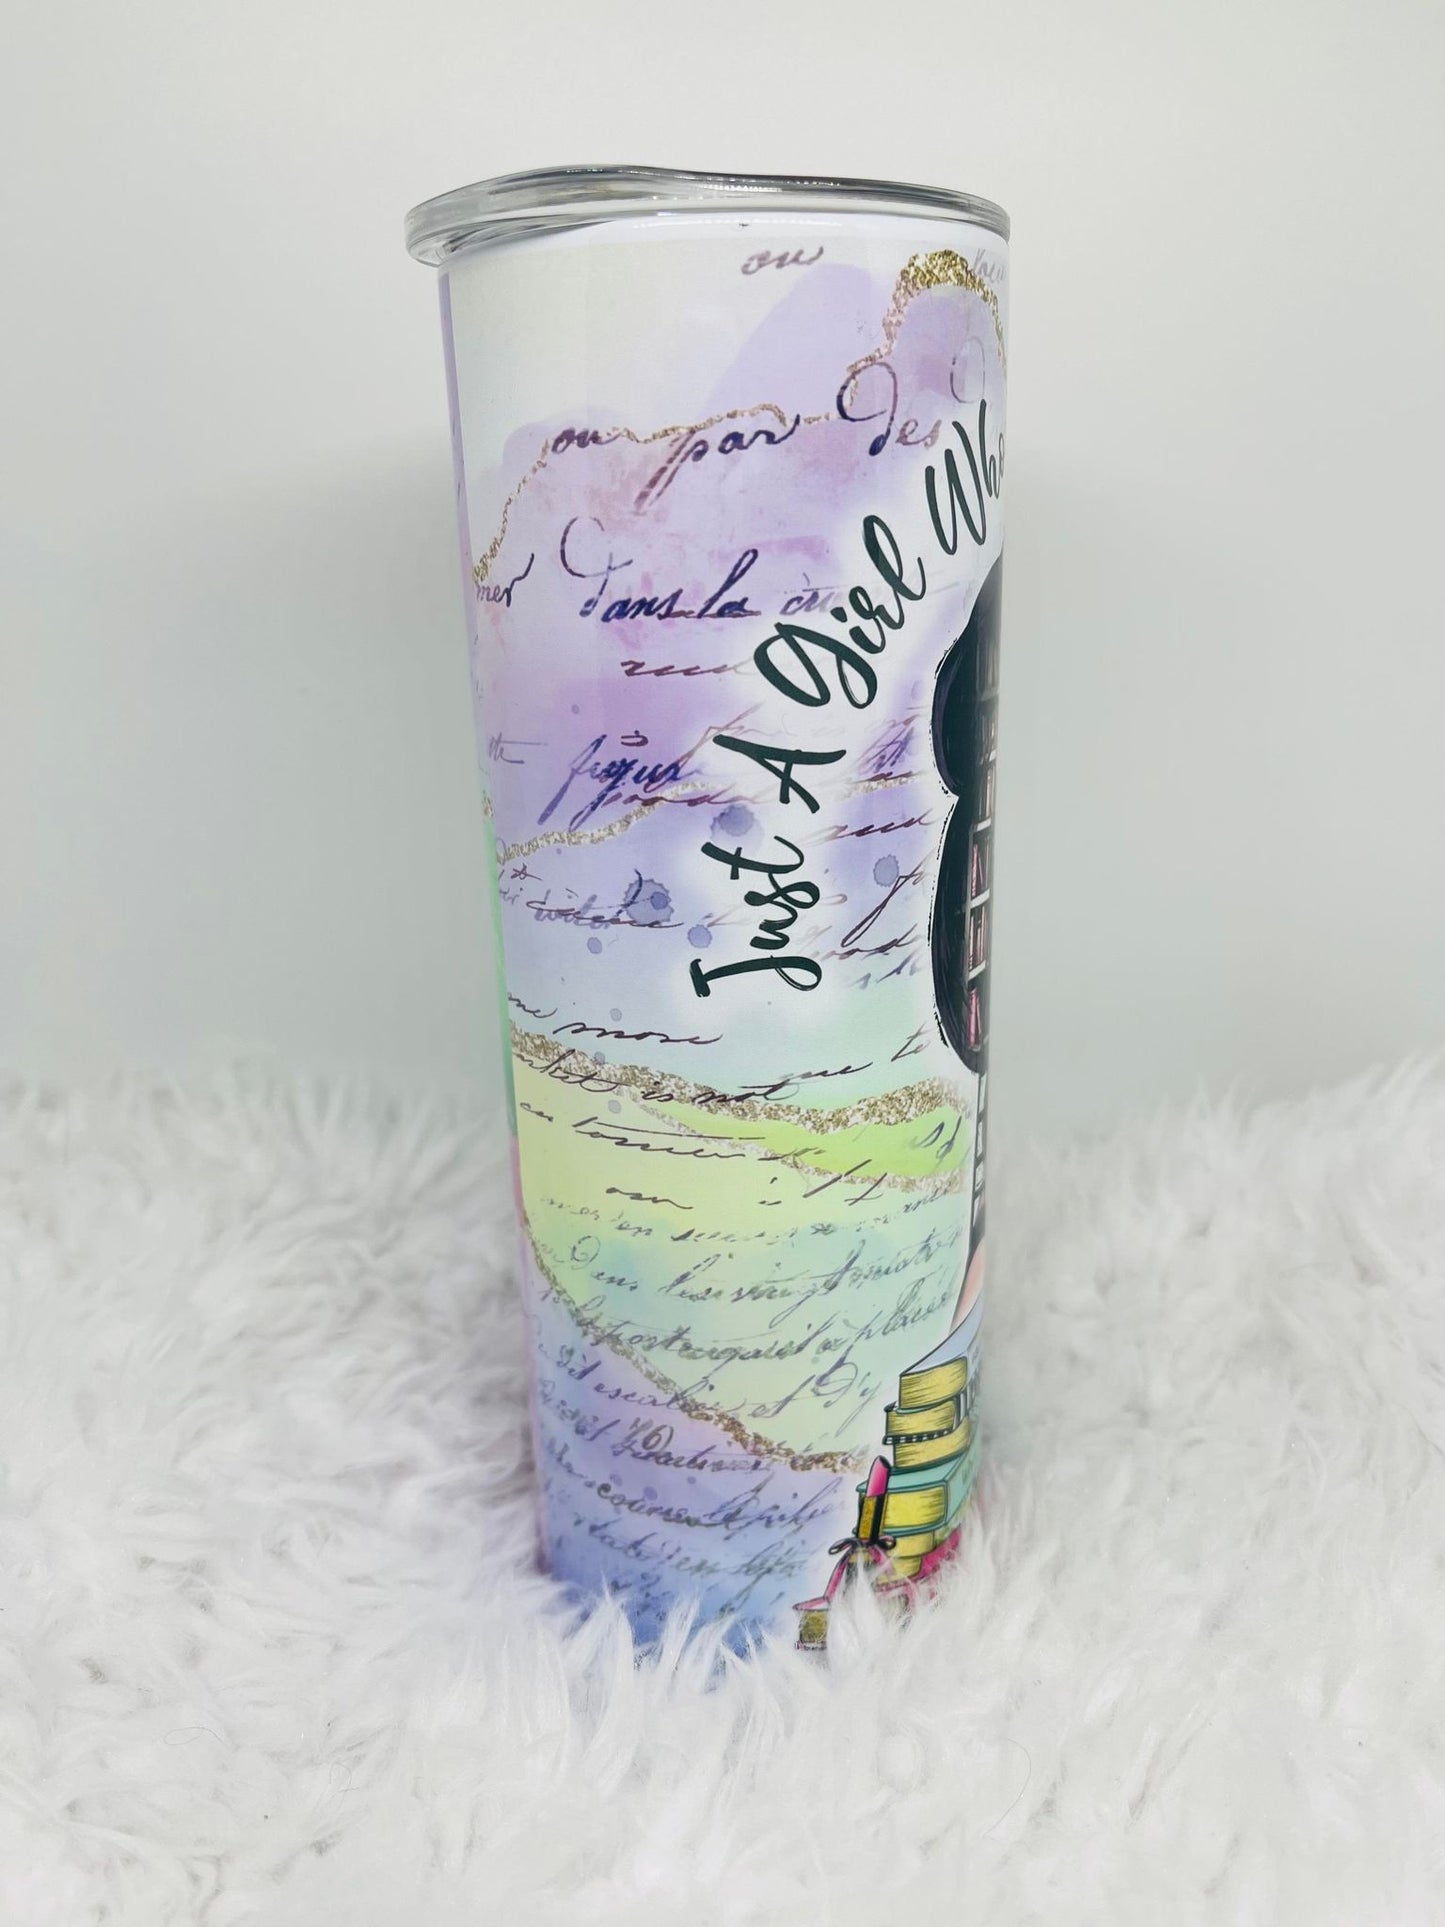 Just a Girl who Loves Books Tumbler